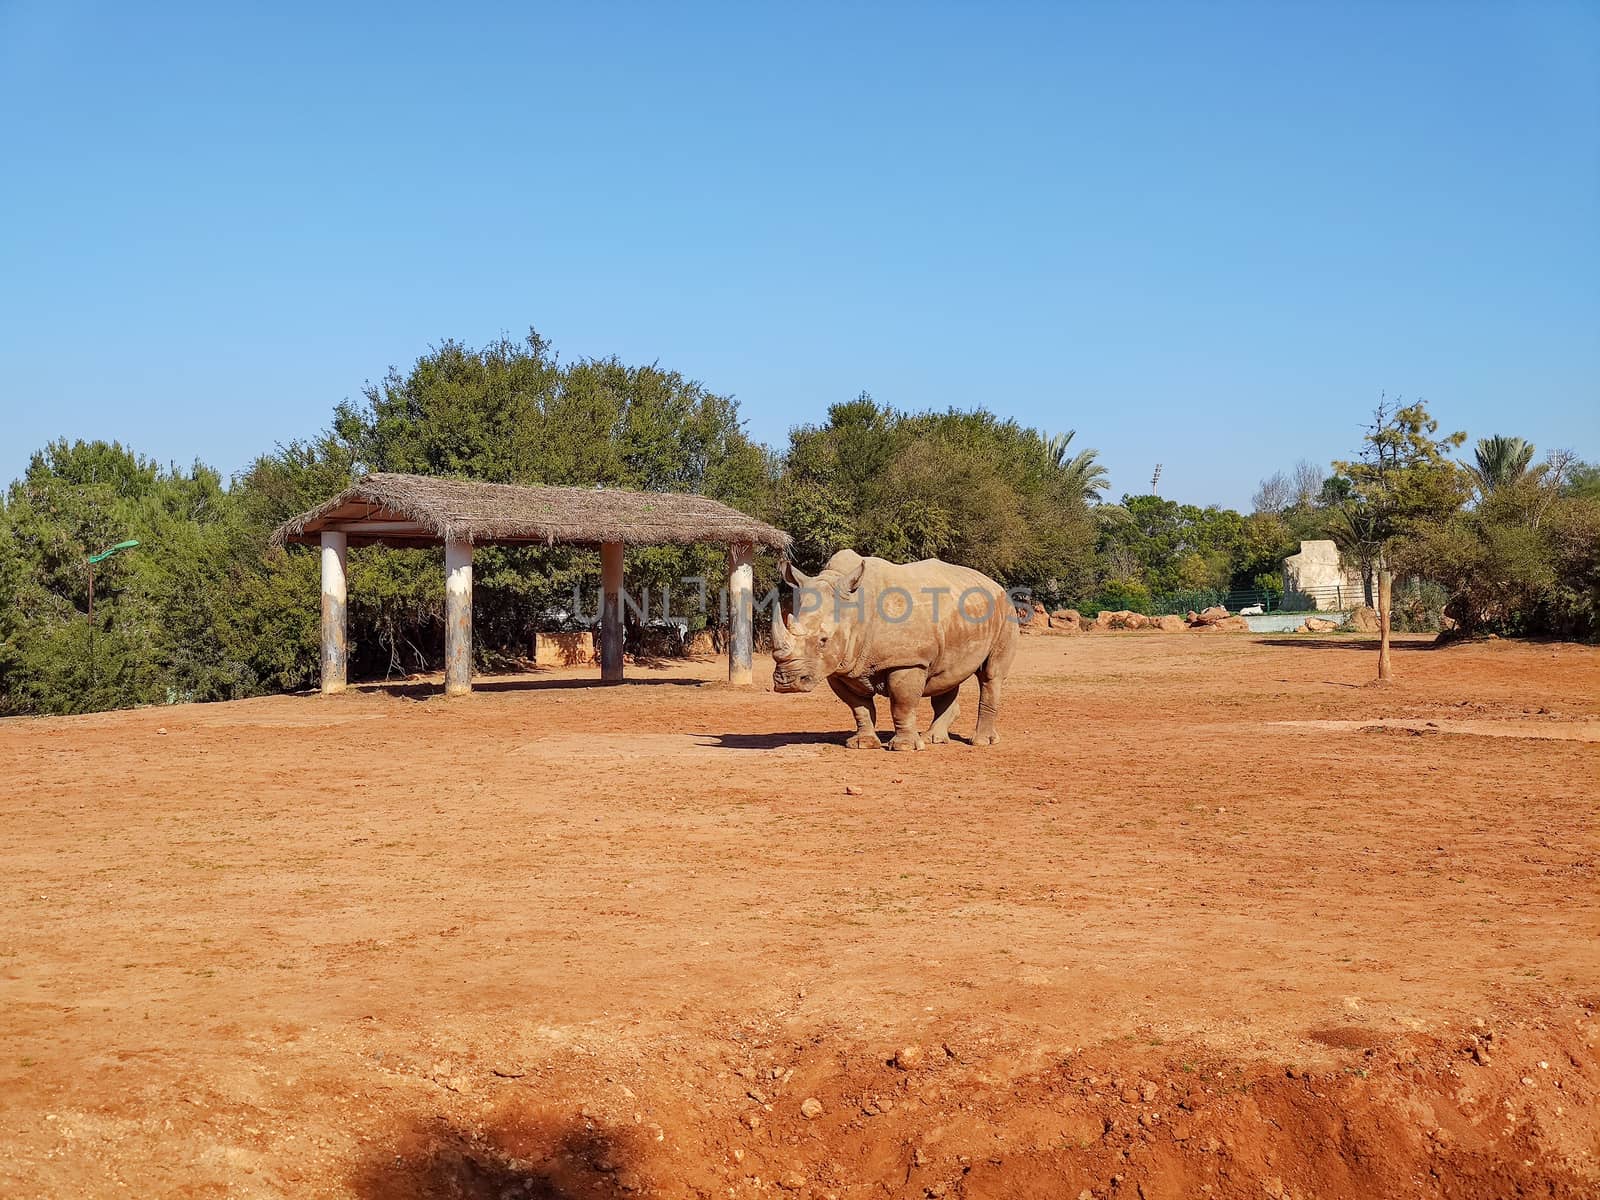 A huge rhino standing in the zoo